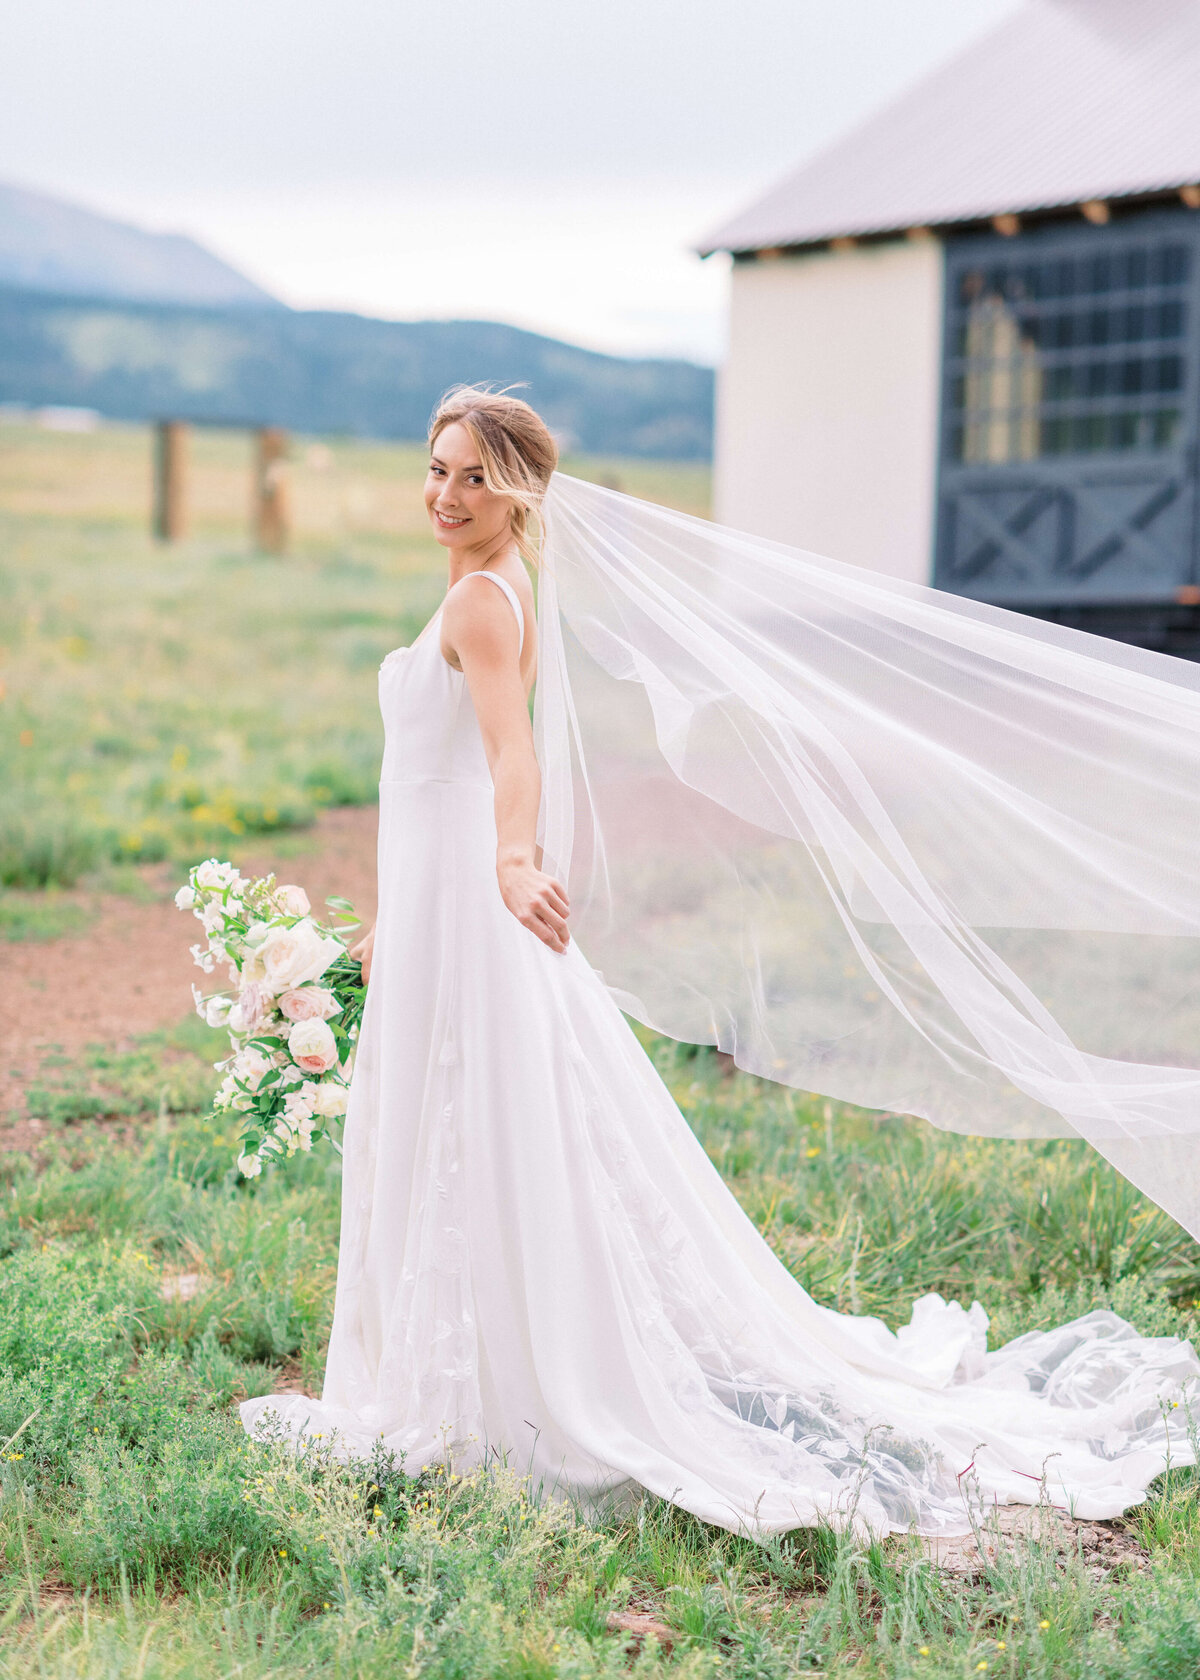 During a fun and whimsical moment, the bride waves her veil in the wind